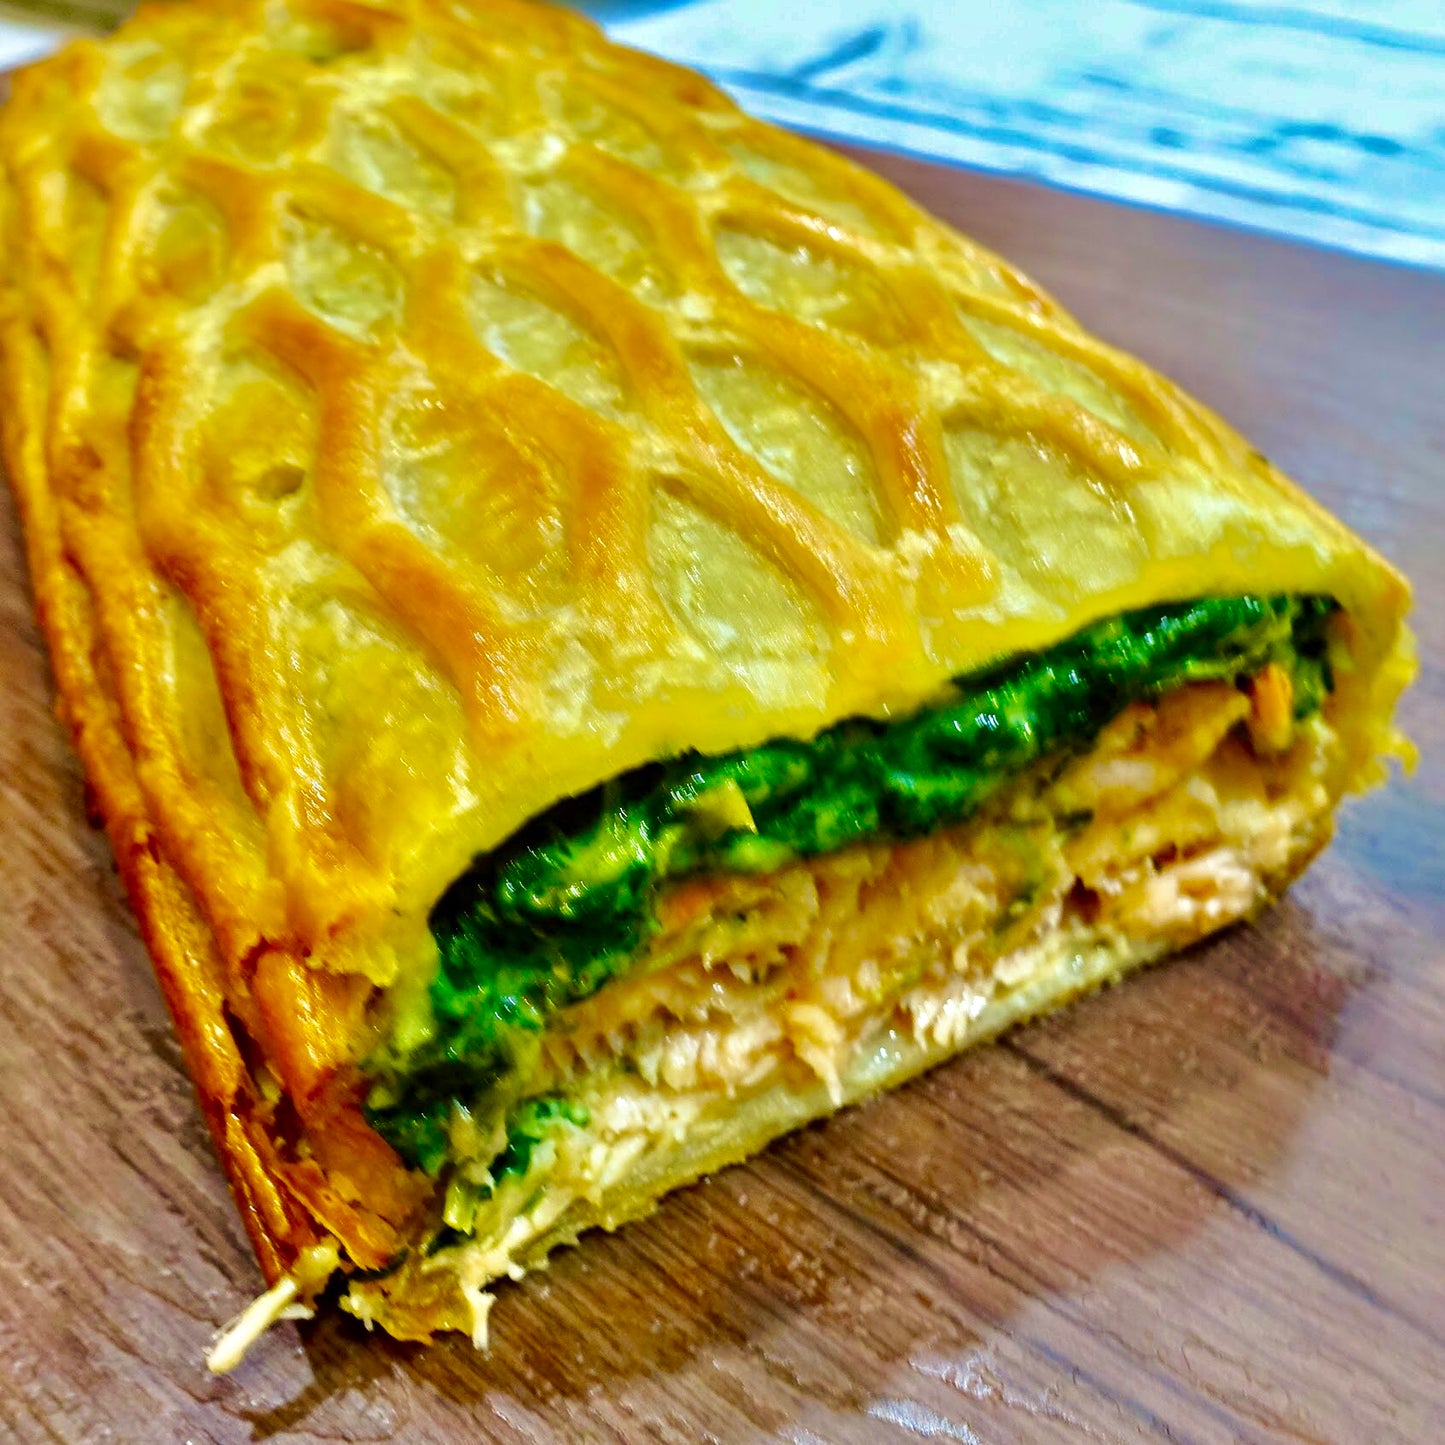 Salmon "Coulibiac" Wellington in Pastry with White Wine Sauce (1.2kg)